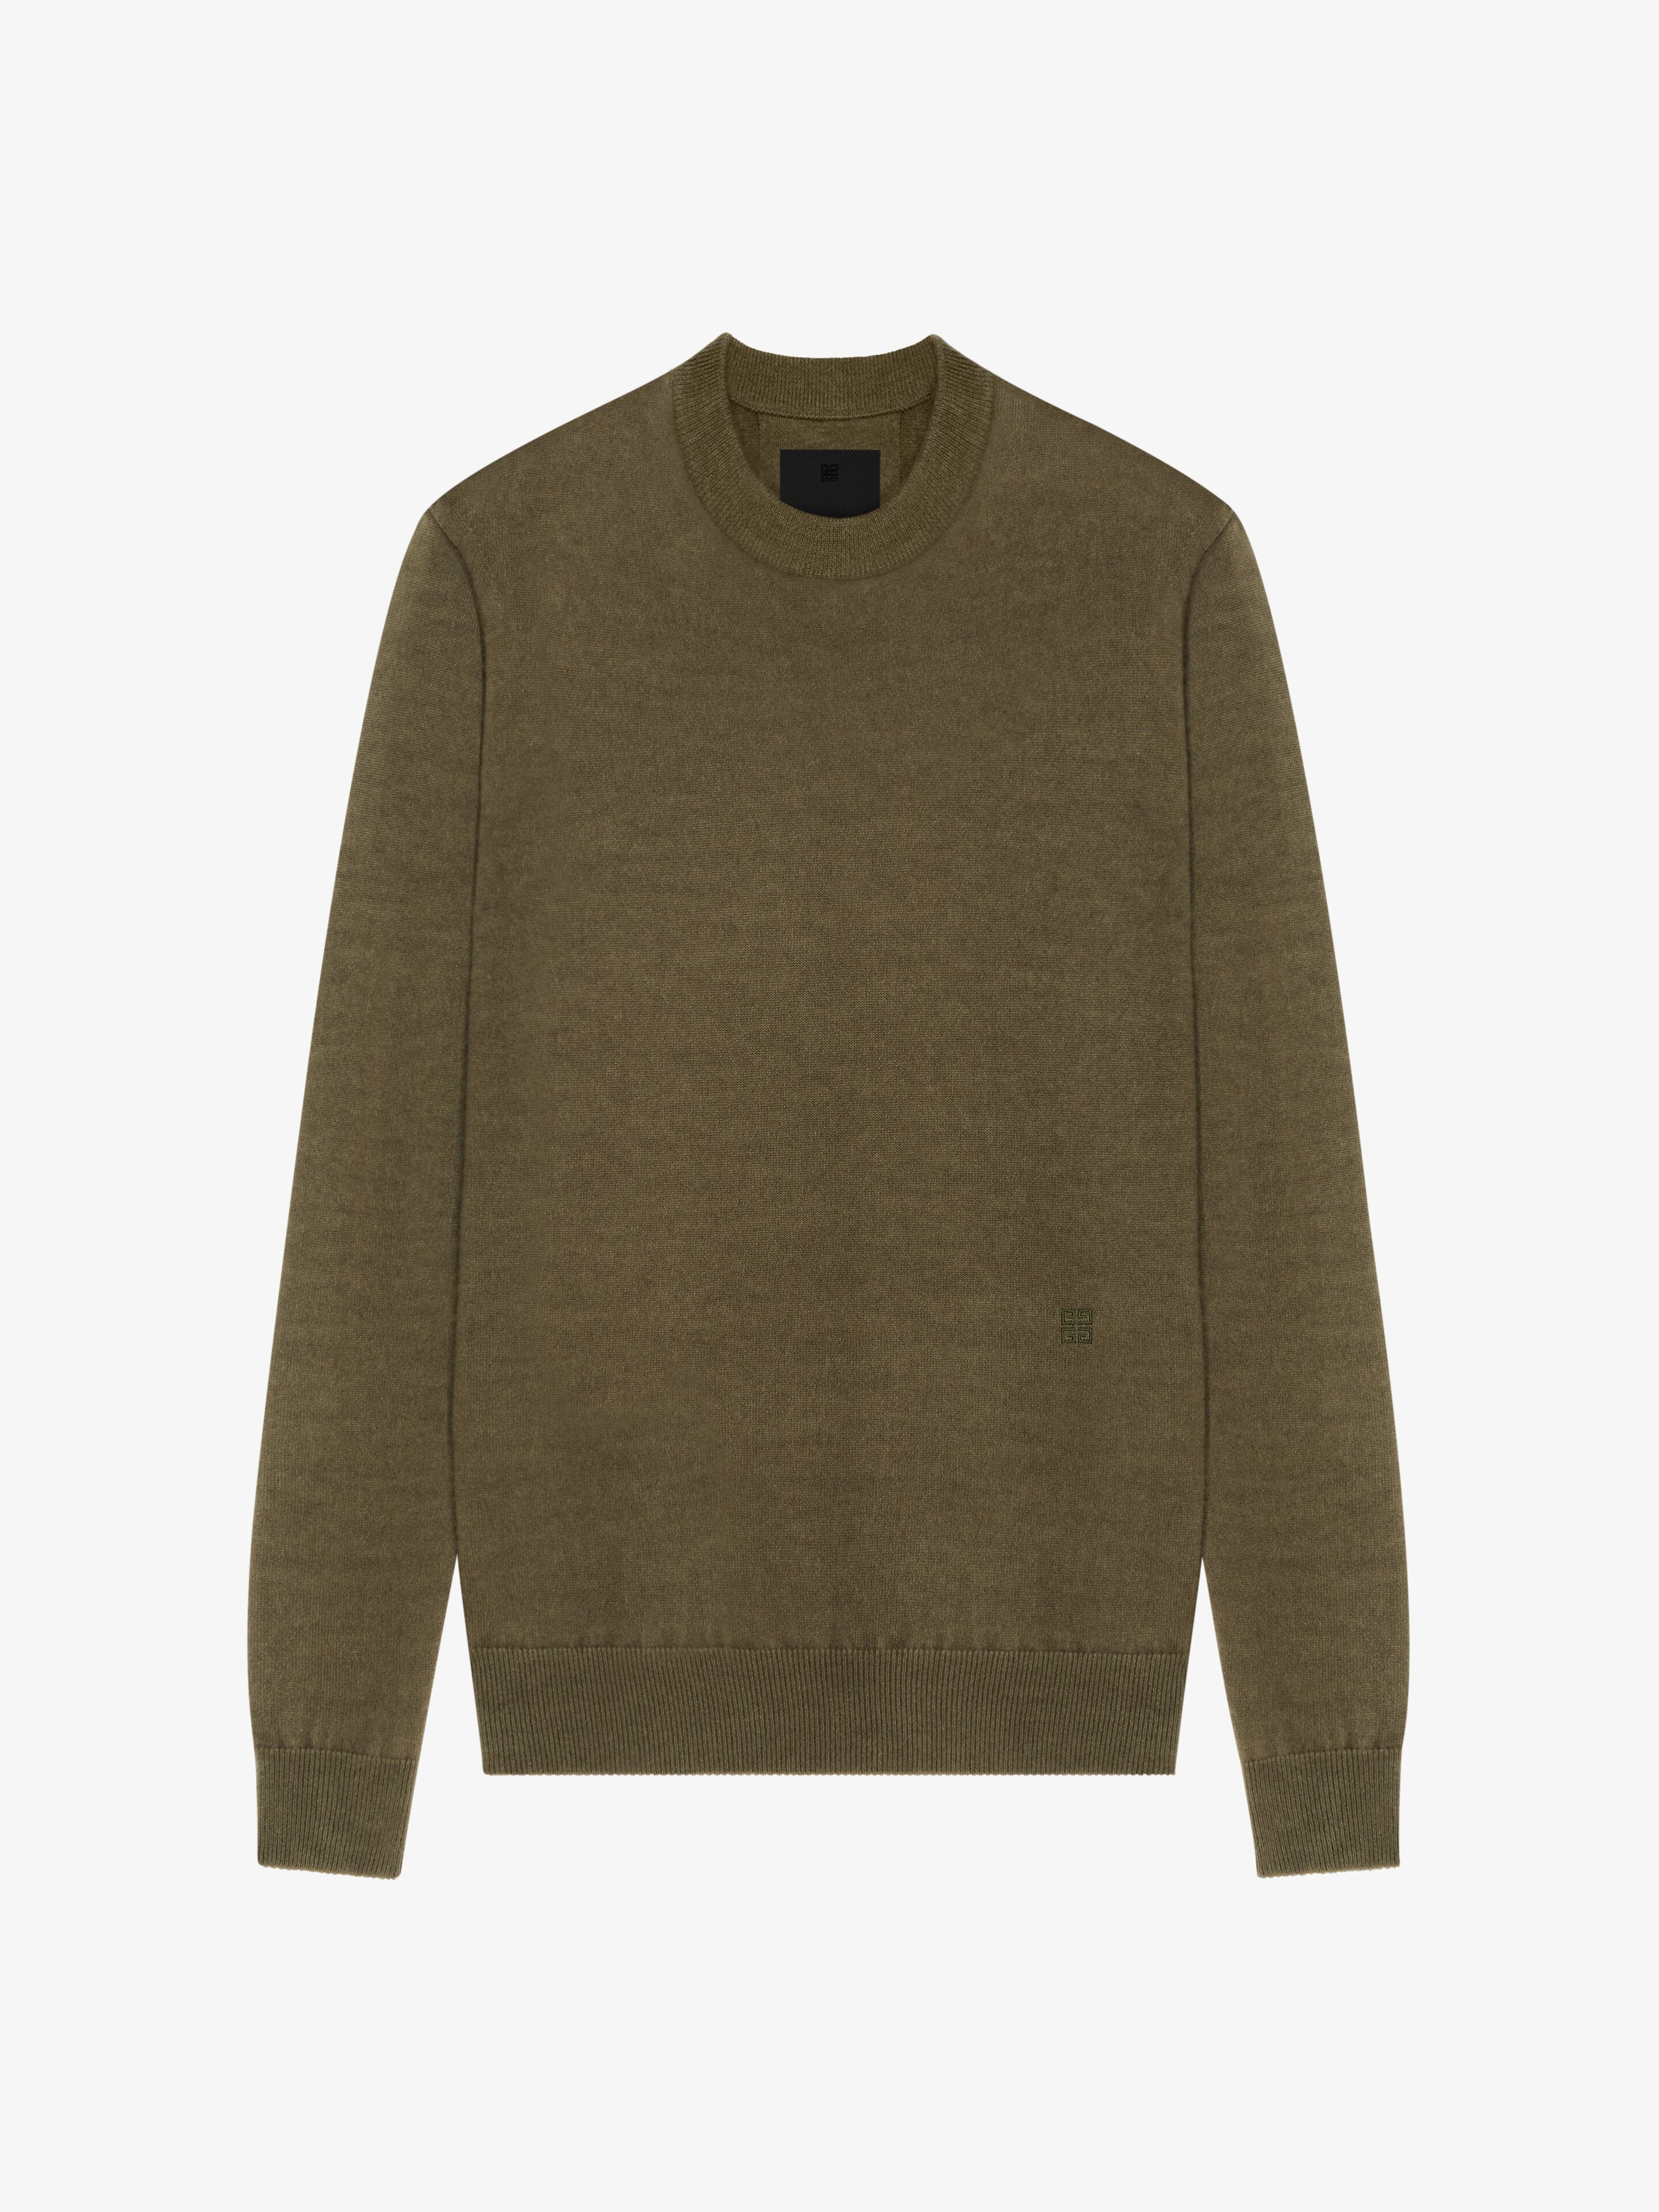 Givenchy Knitwear for Men sale - discounted price - Philippines